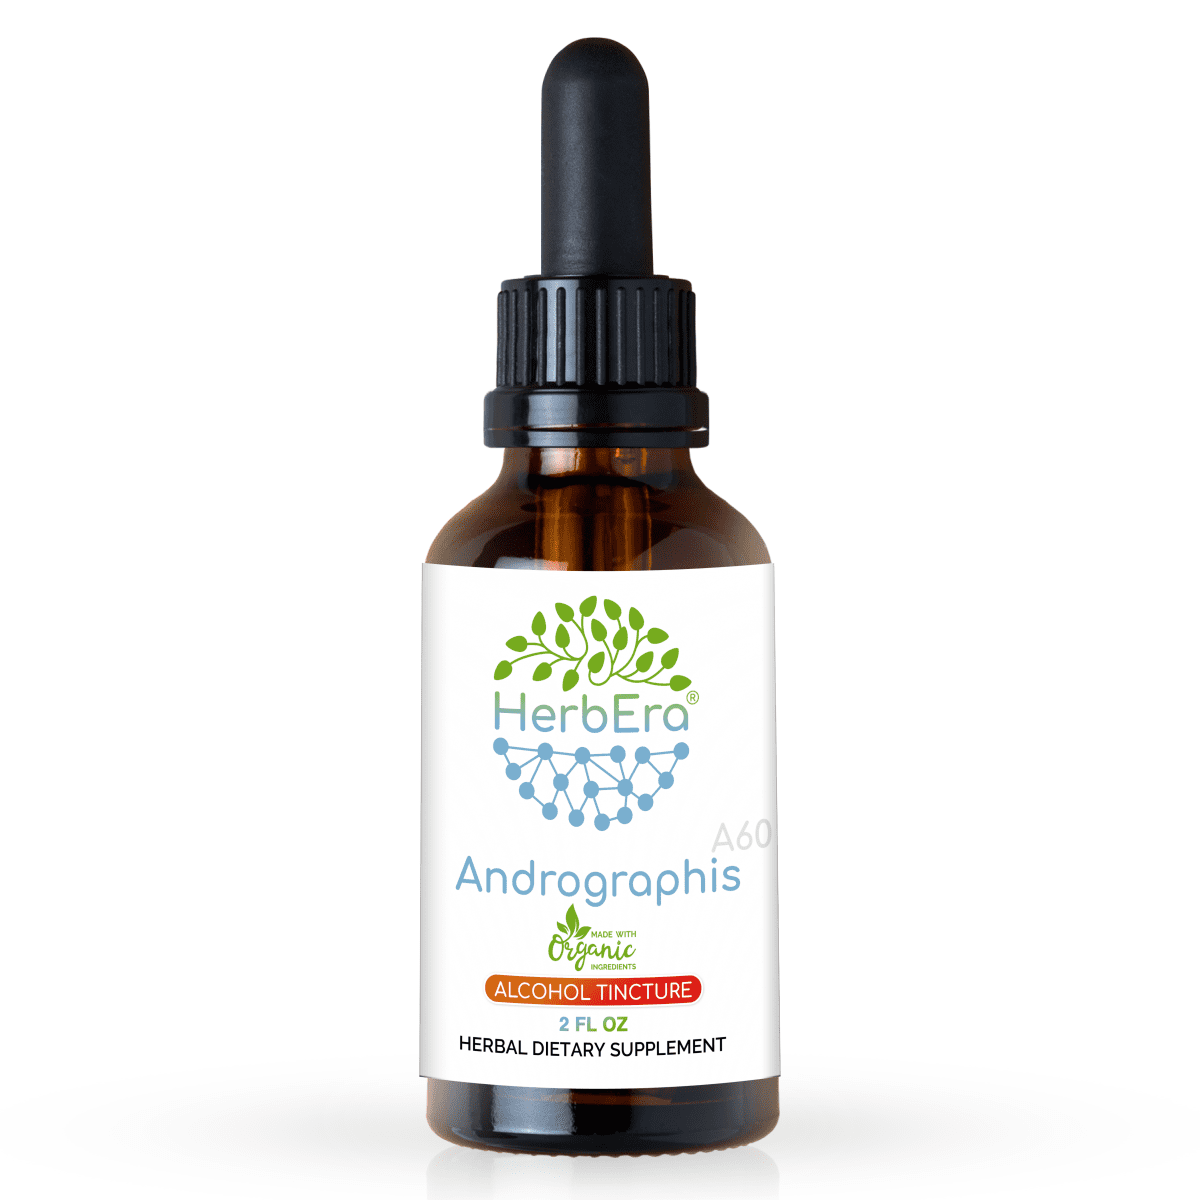 Echinacea Angustifolia Alcohol-FREE Herbal Extract Tincture,  Super-Concentrated Responsibly farmed organic Echinacea (Echinacea  Angustifolia) Dried Root 2 oz - Walmart.com